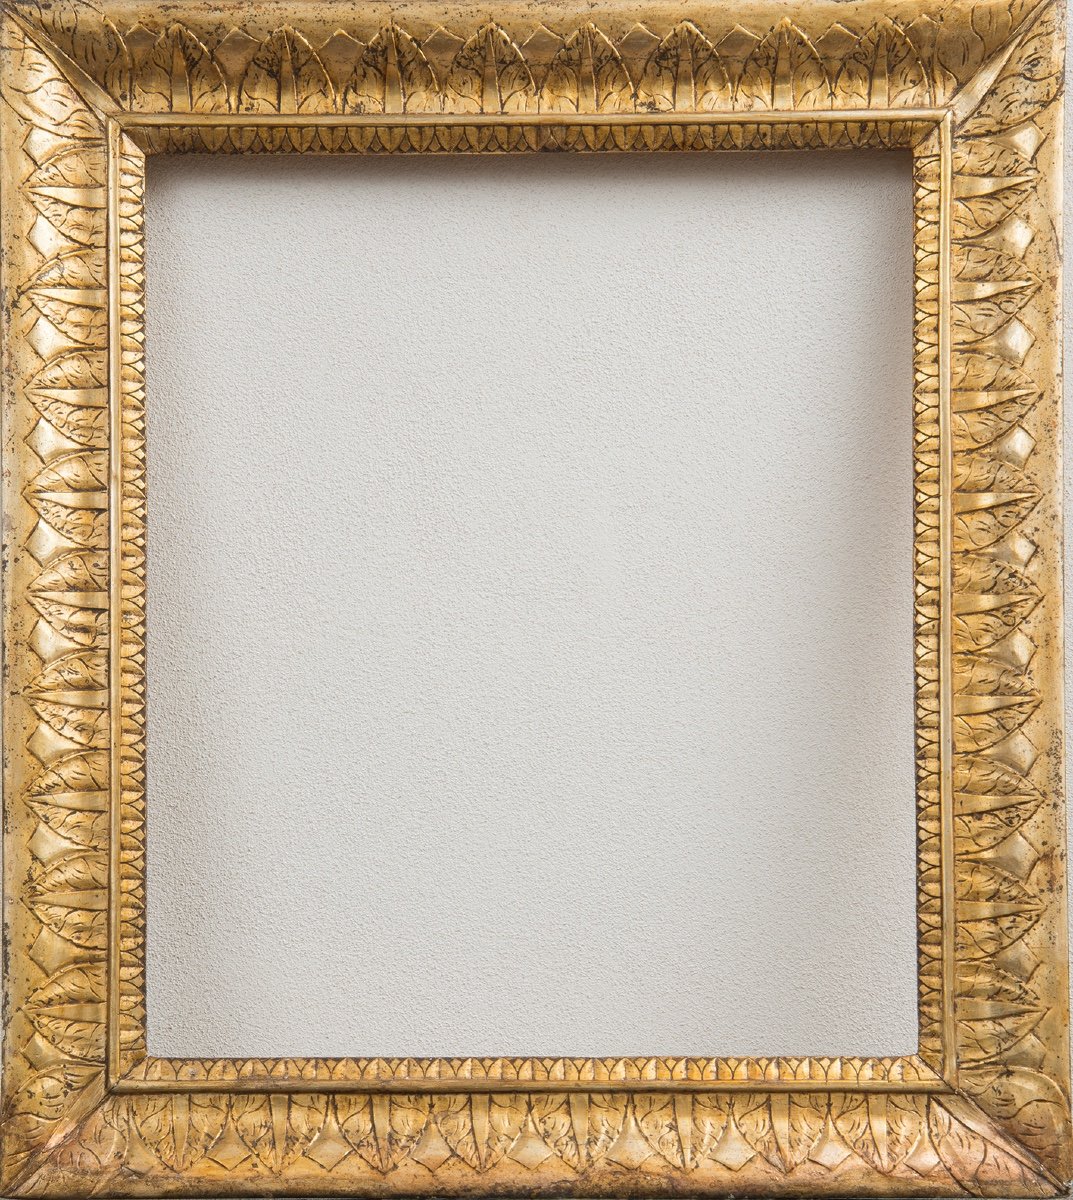 Ancient Neapolitan Empire Frame From The Early 19th Century.